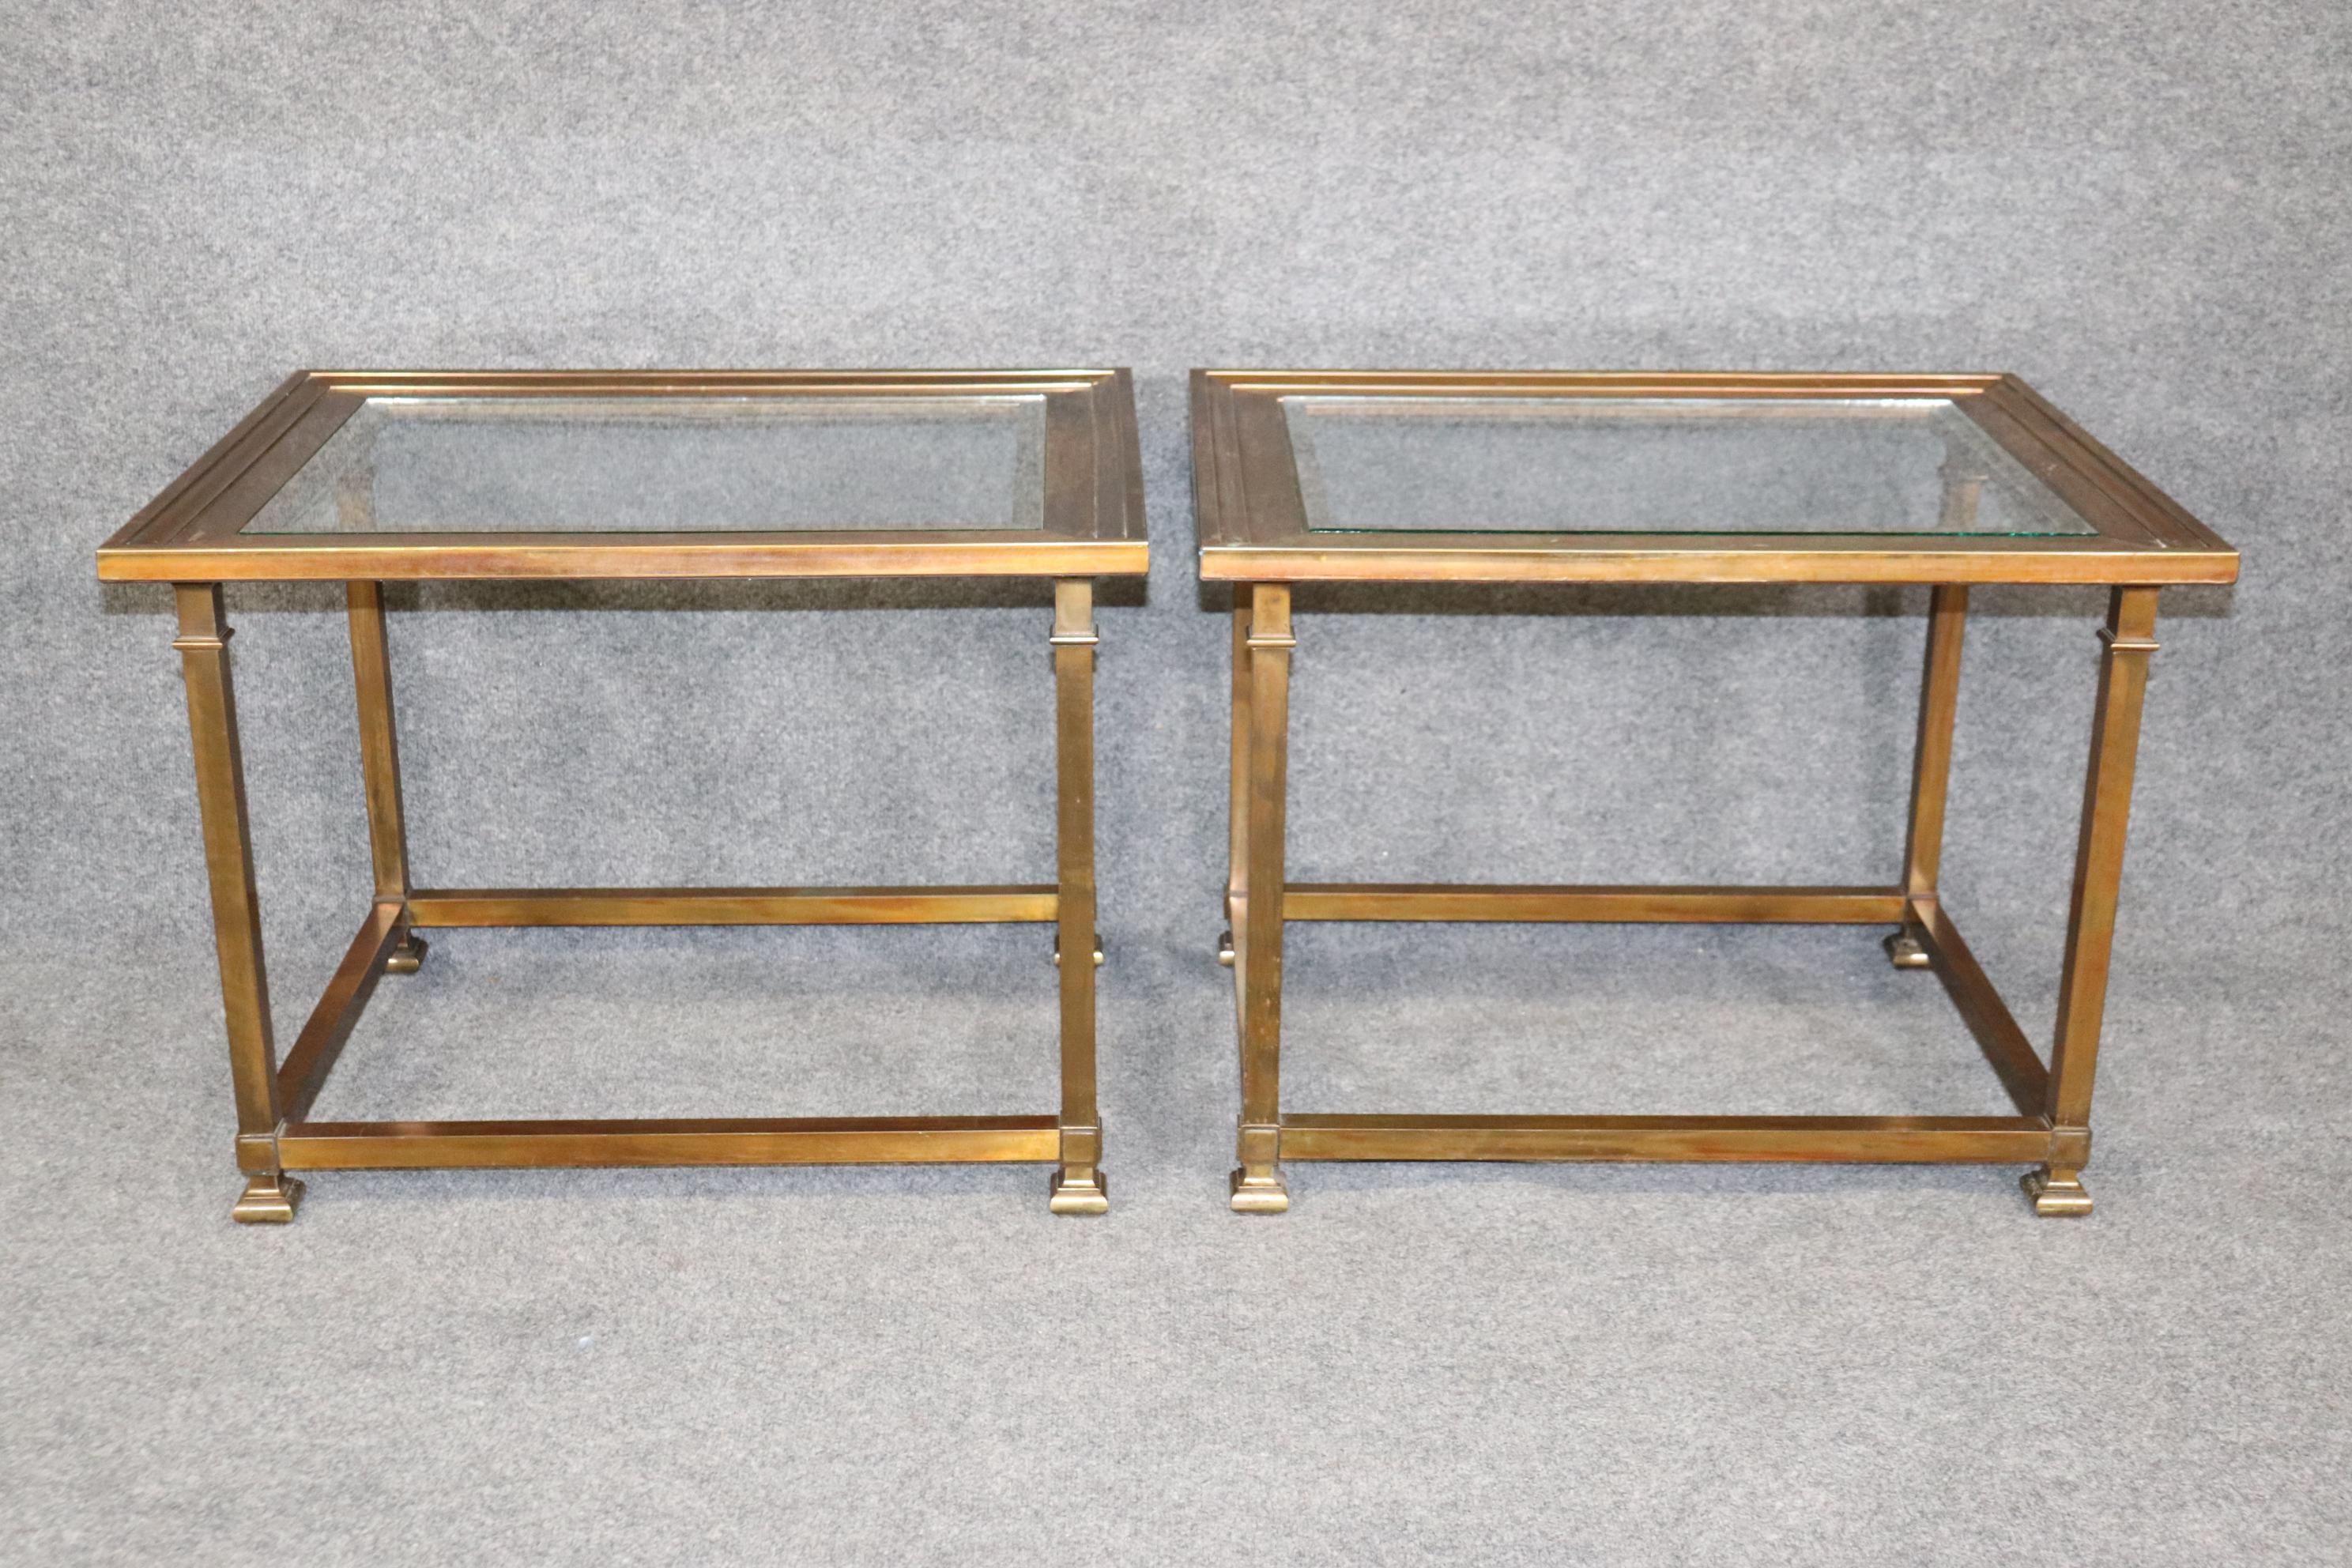 Dimensions- H: 21in W: 28in D: 22in 
This Mid-Century Modern Pair of Rectangular Brass Mastercraft Glass Top End Tables are made of the highest quality and are perfect for you and your home! If you take a look at the photos provided you will see